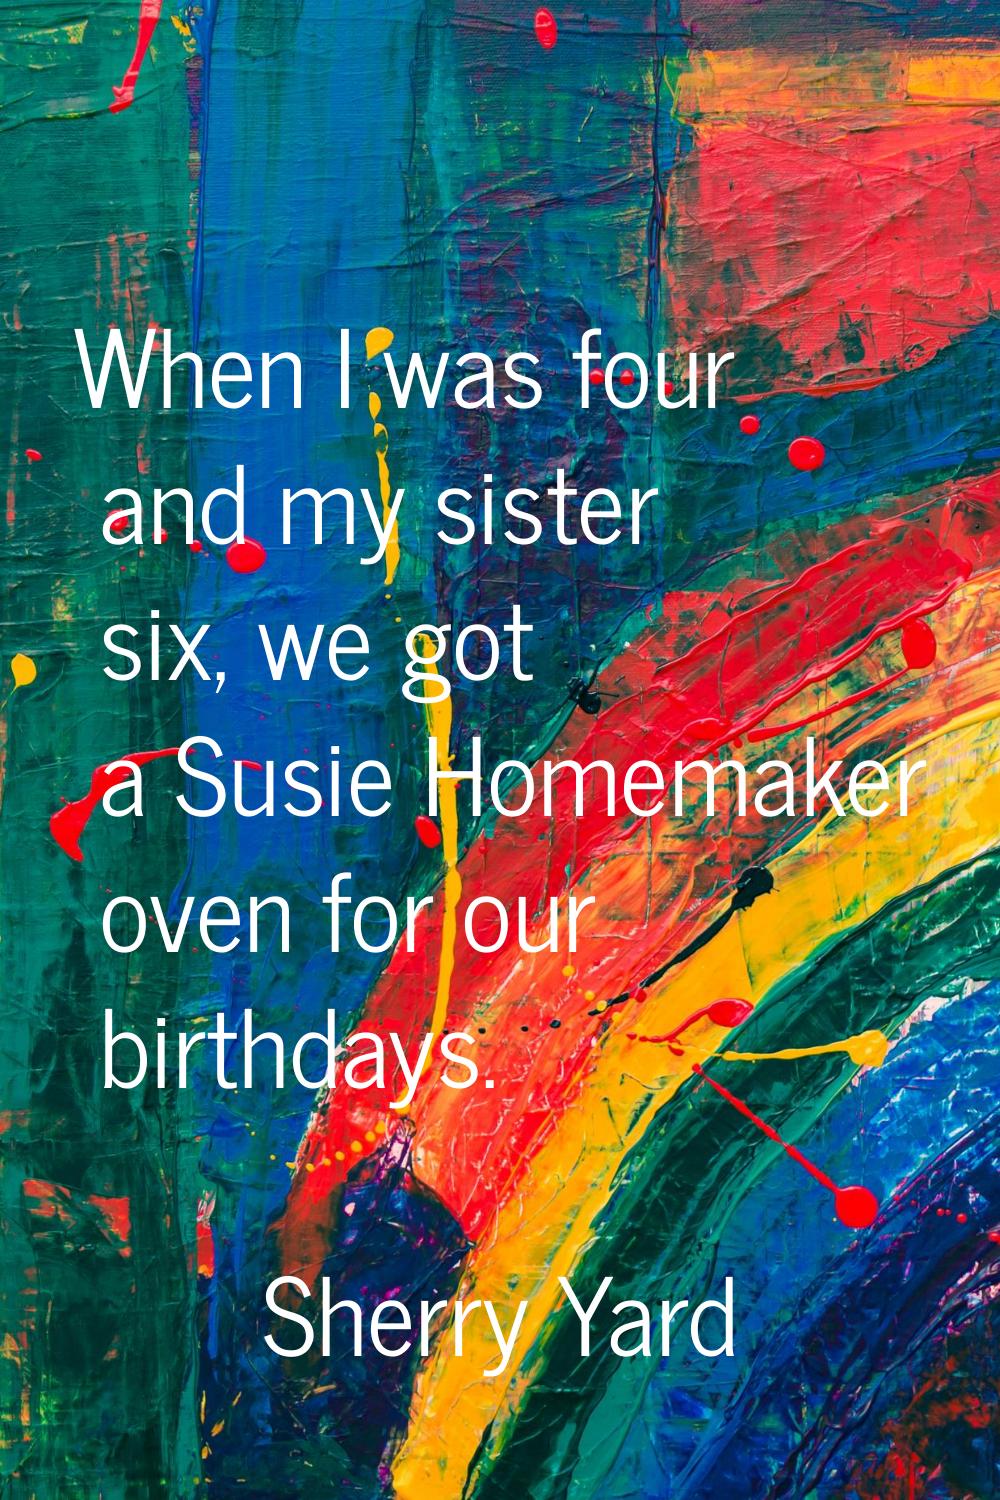 When I was four and my sister six, we got a Susie Homemaker oven for our birthdays.